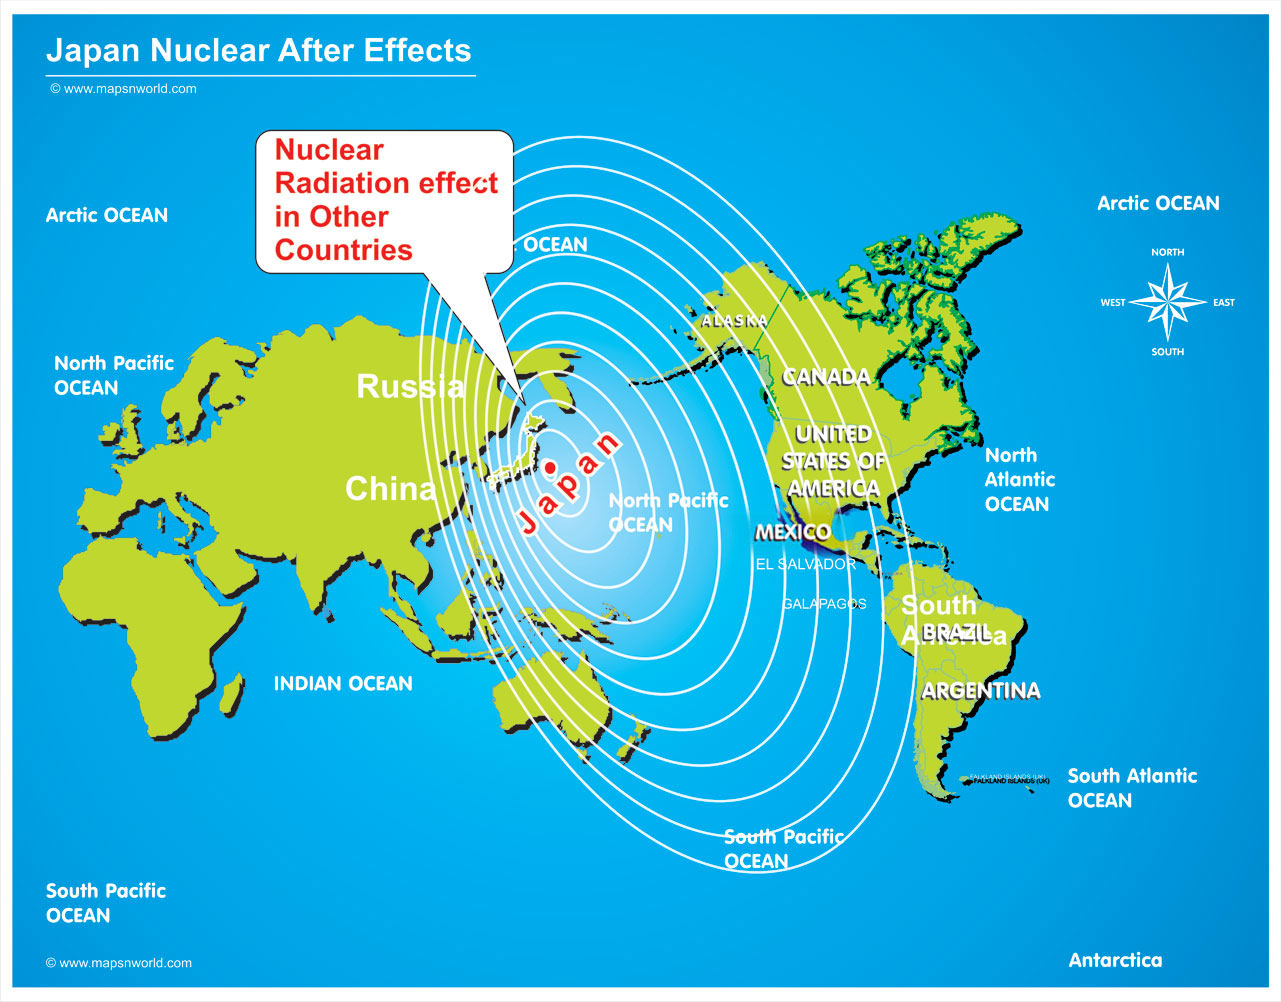 Japan's Nuclear Radiation Effected Countries 2011